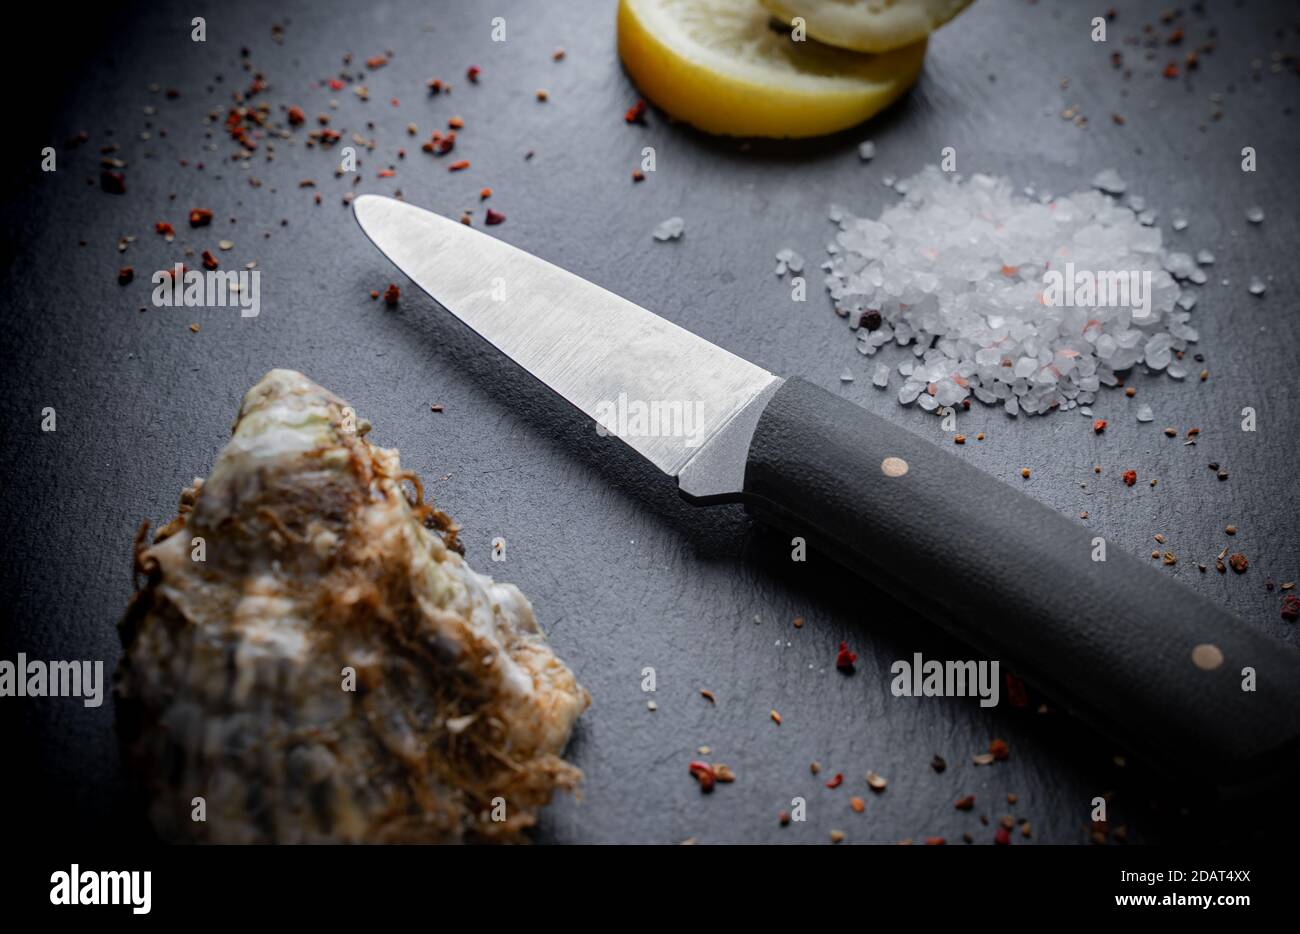 Oyster knife on on a black stone background with lemon and spices. Top view Stock Photo